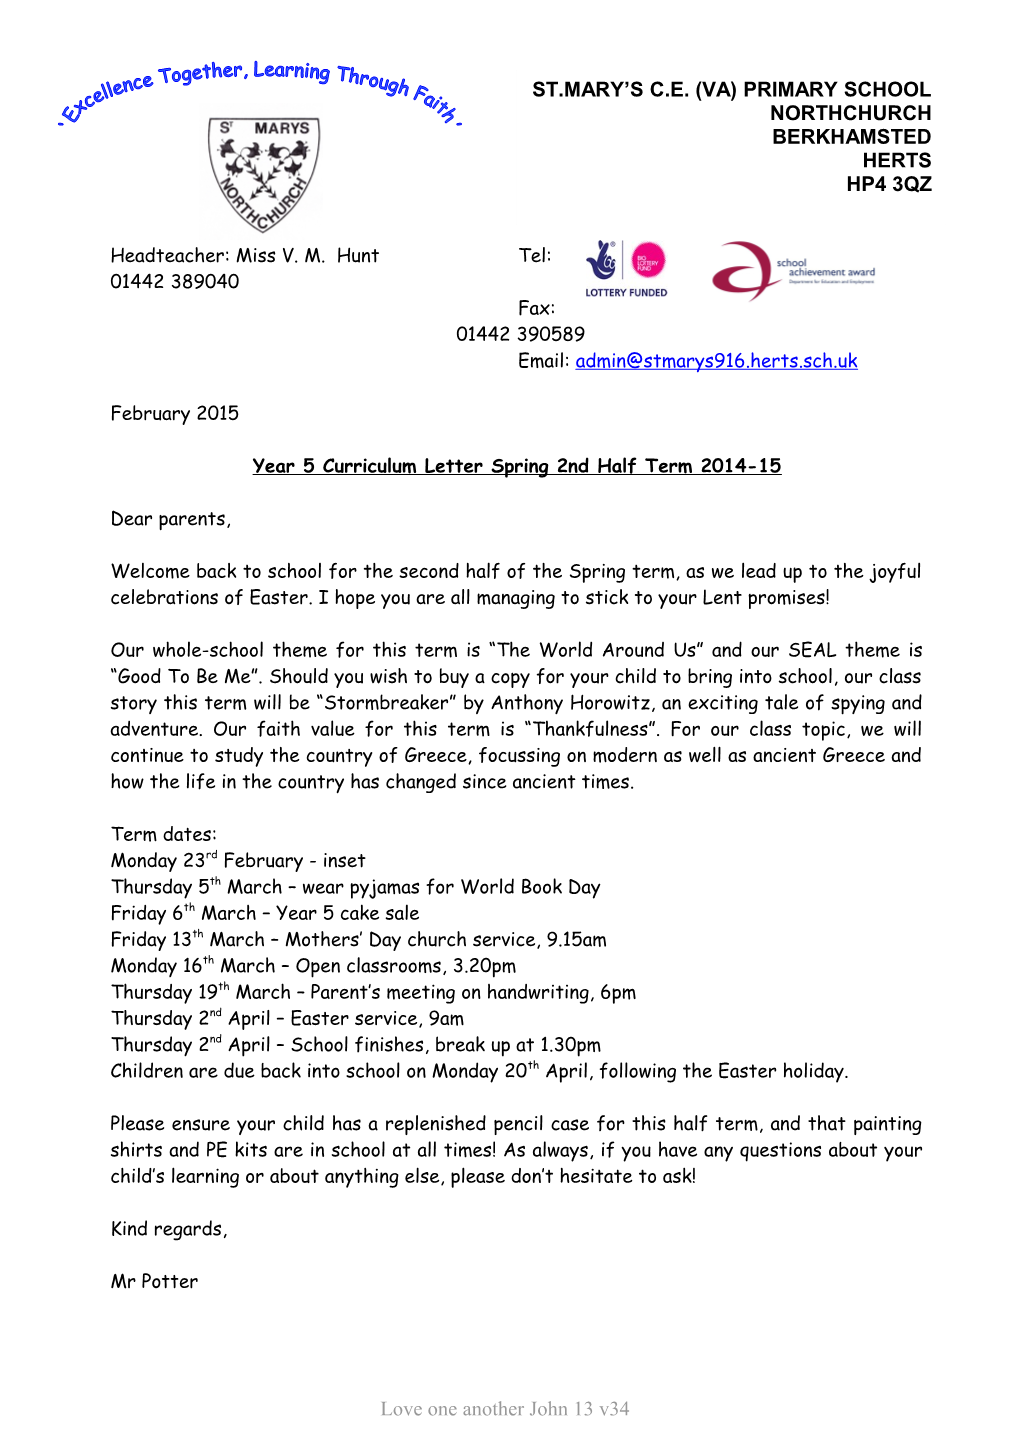 Year 5Curriculum Letter Spring2nd Half Term 2014-15